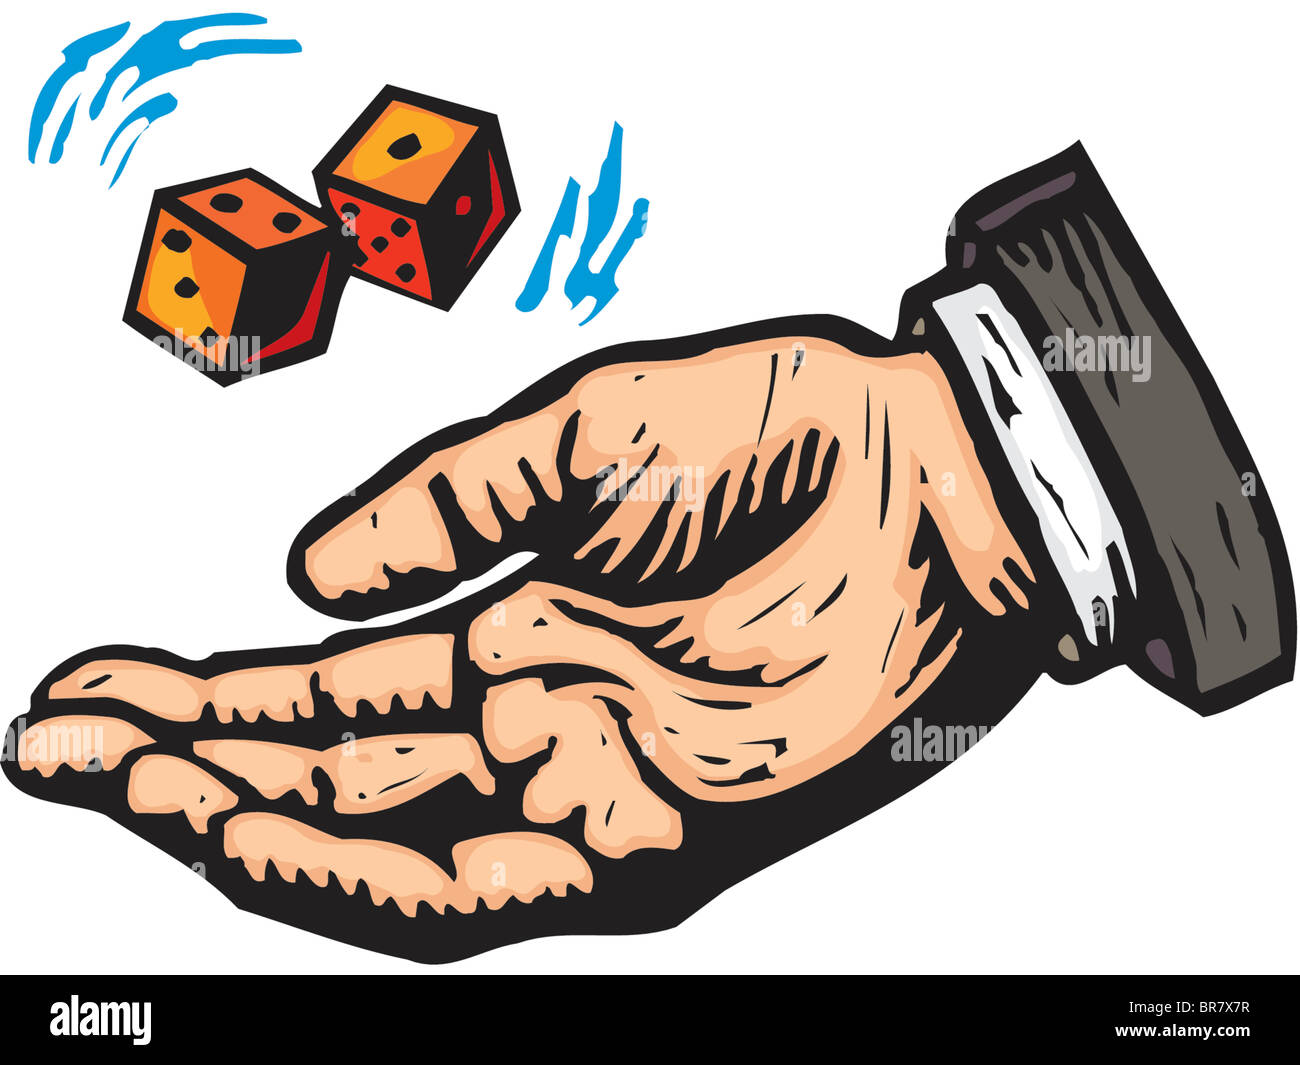 A hand tossing a pair of dice Stock Photo